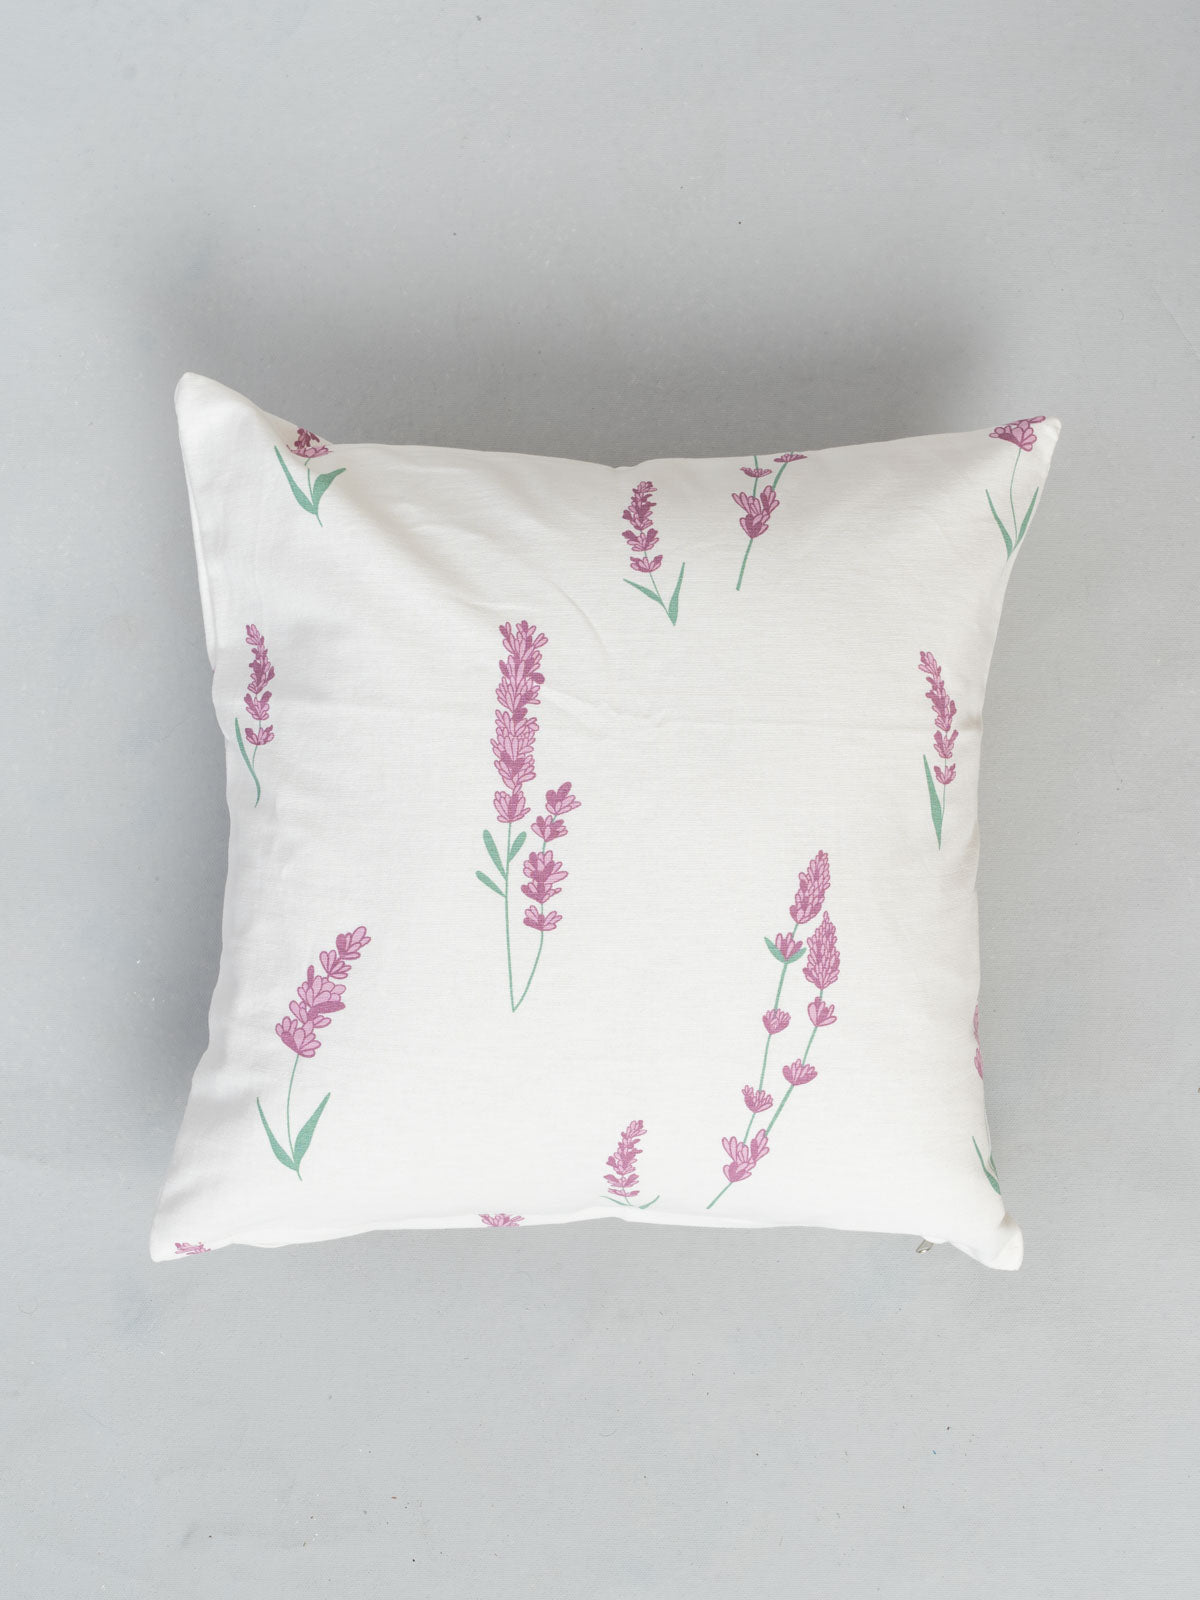 Humming Birds, Fields Of Lavender, Grape Solid, Gingham Sage Green Set Of 4 Combo Cotton Cushion Cover - Lavender, Sage Green